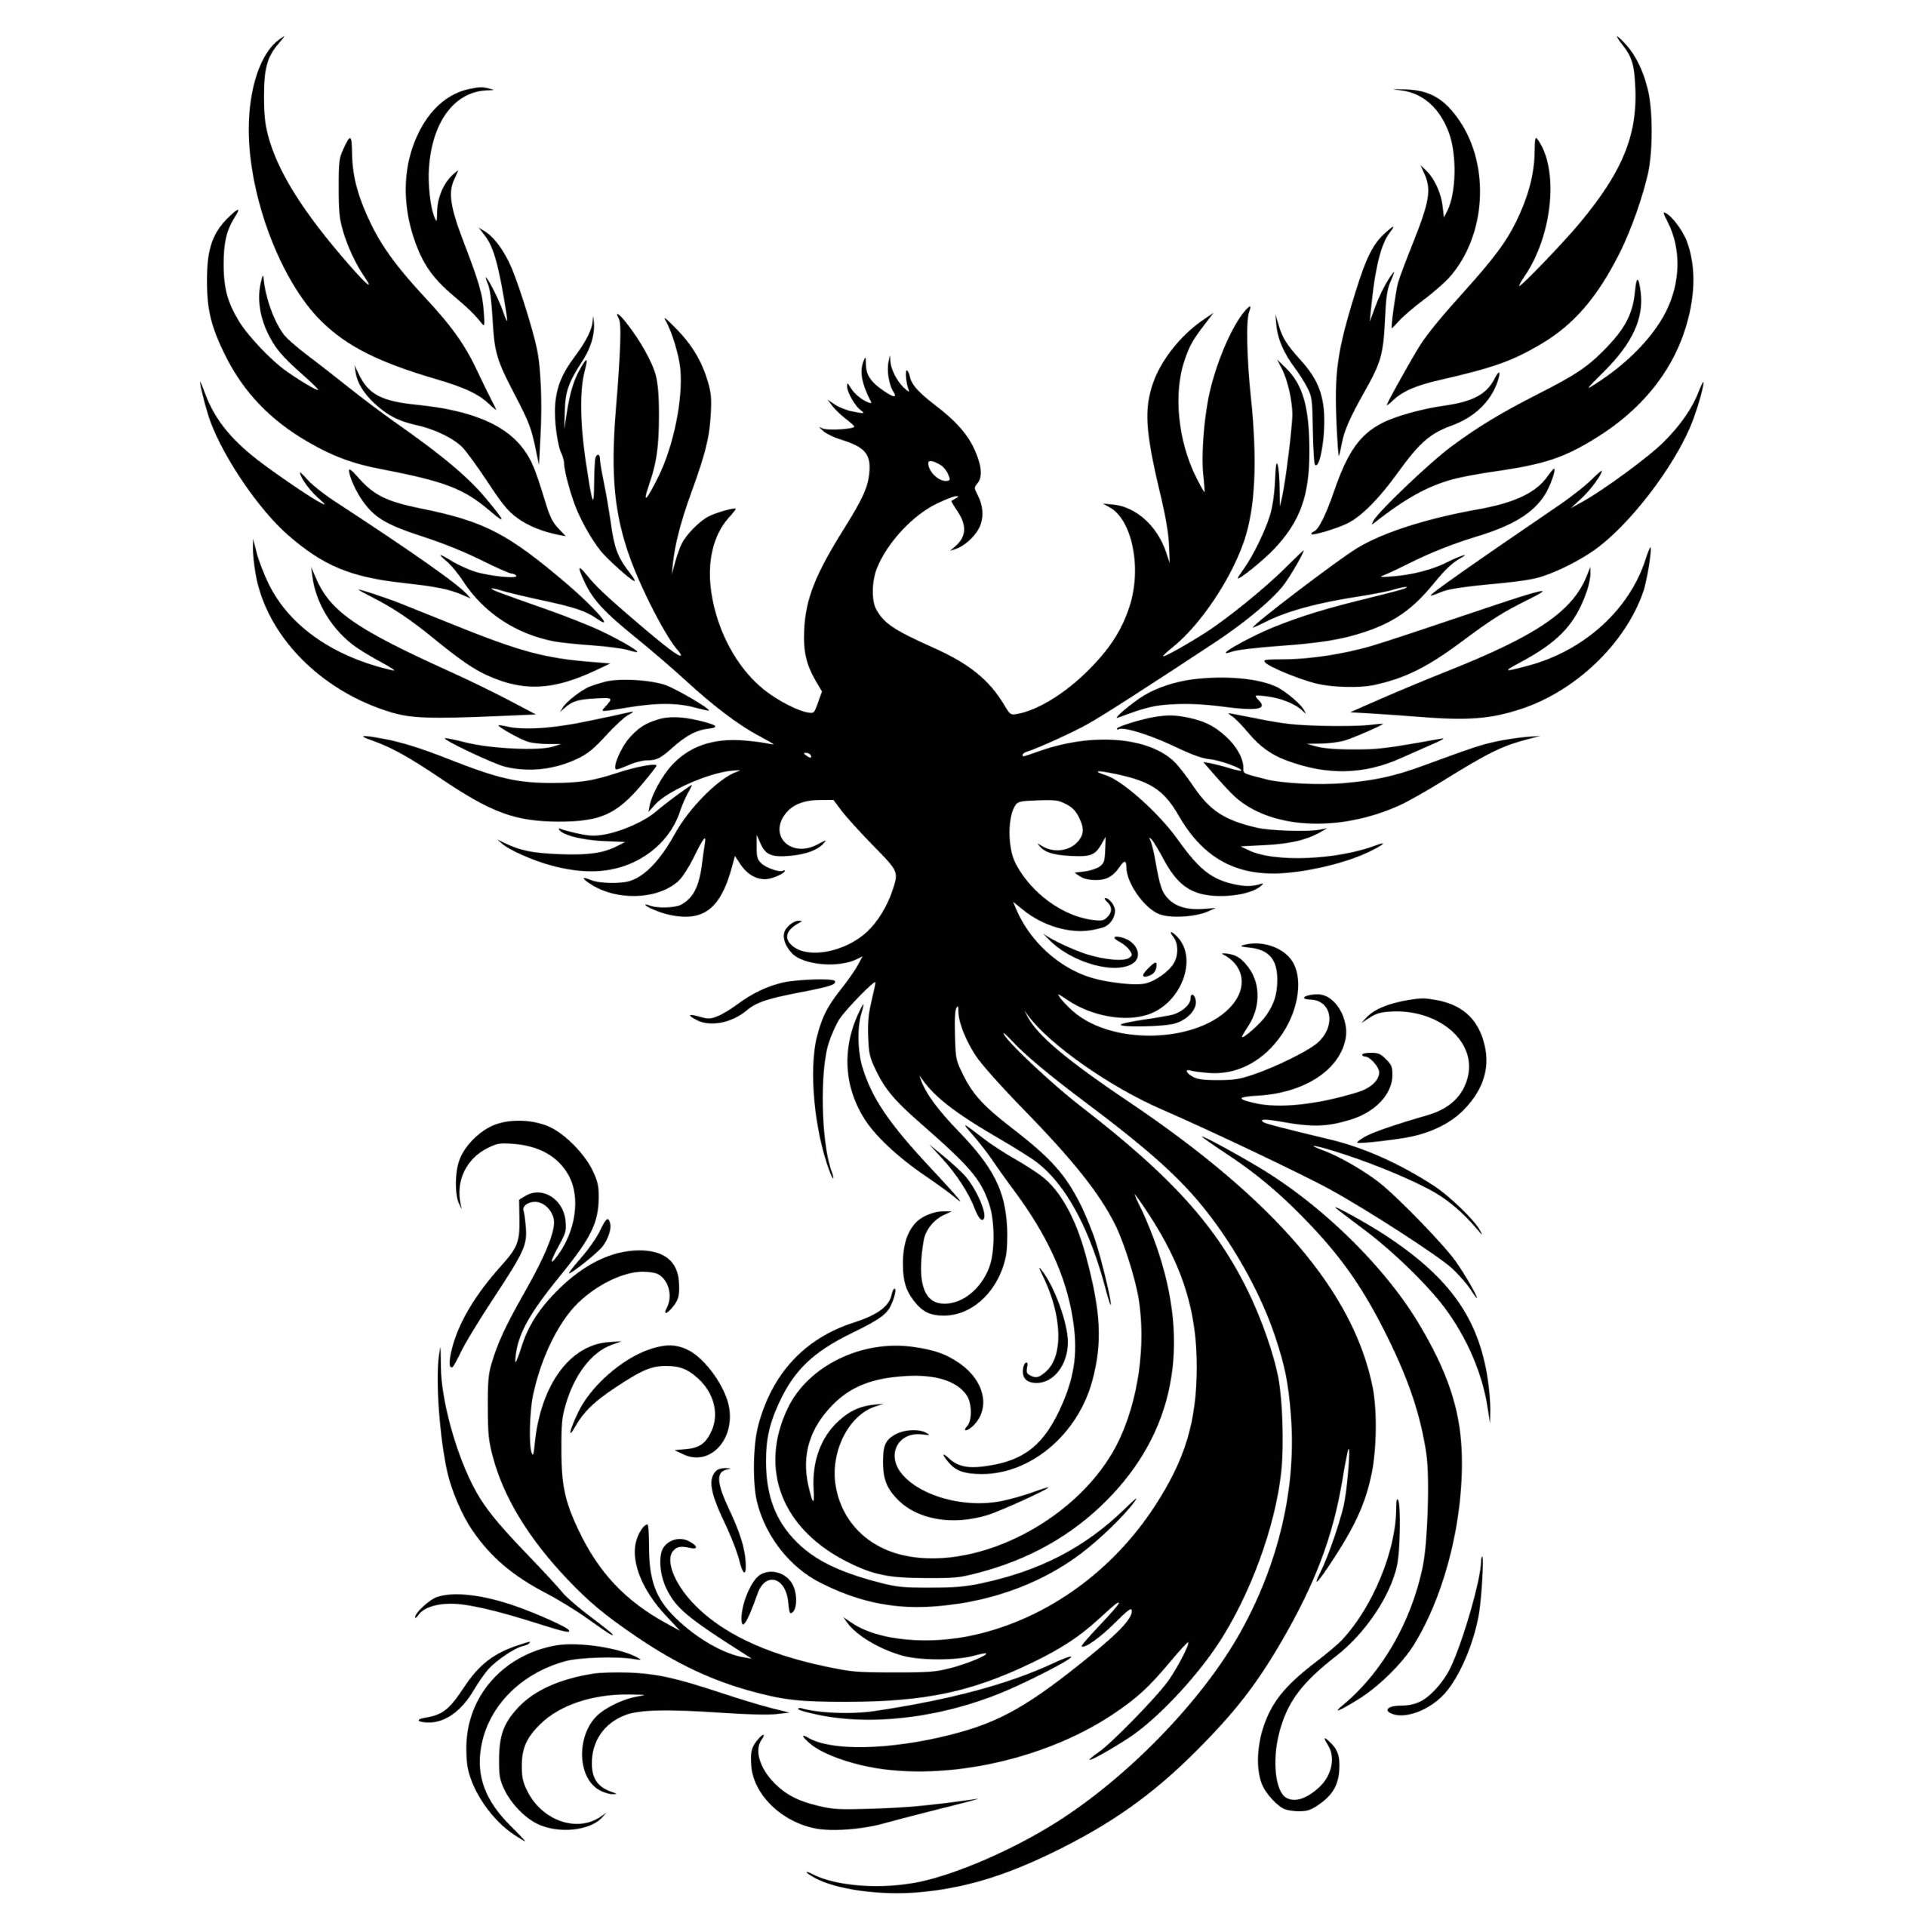 Soaring Phoenix SVG/PNG/DXF File for Cricut, Silhouette, and Laser Machines